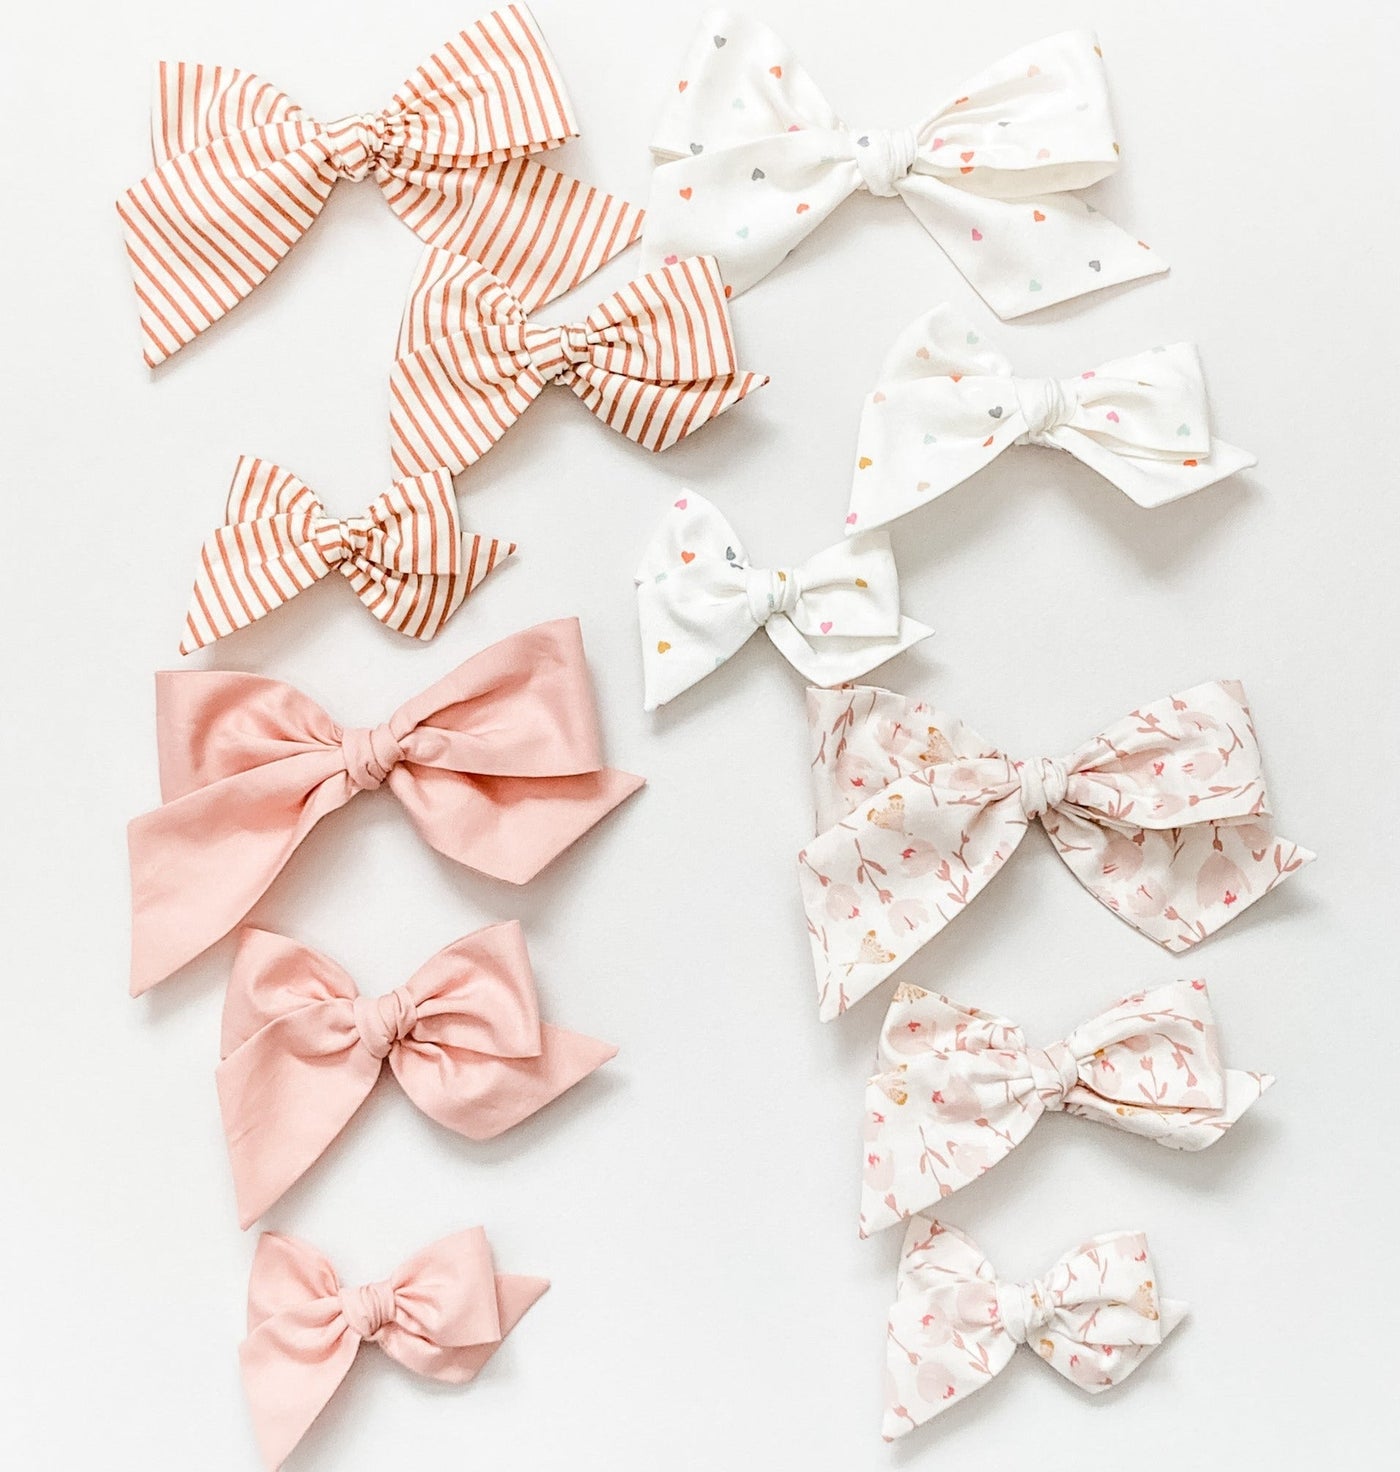 3 sizes of Valentine Hair Bows available